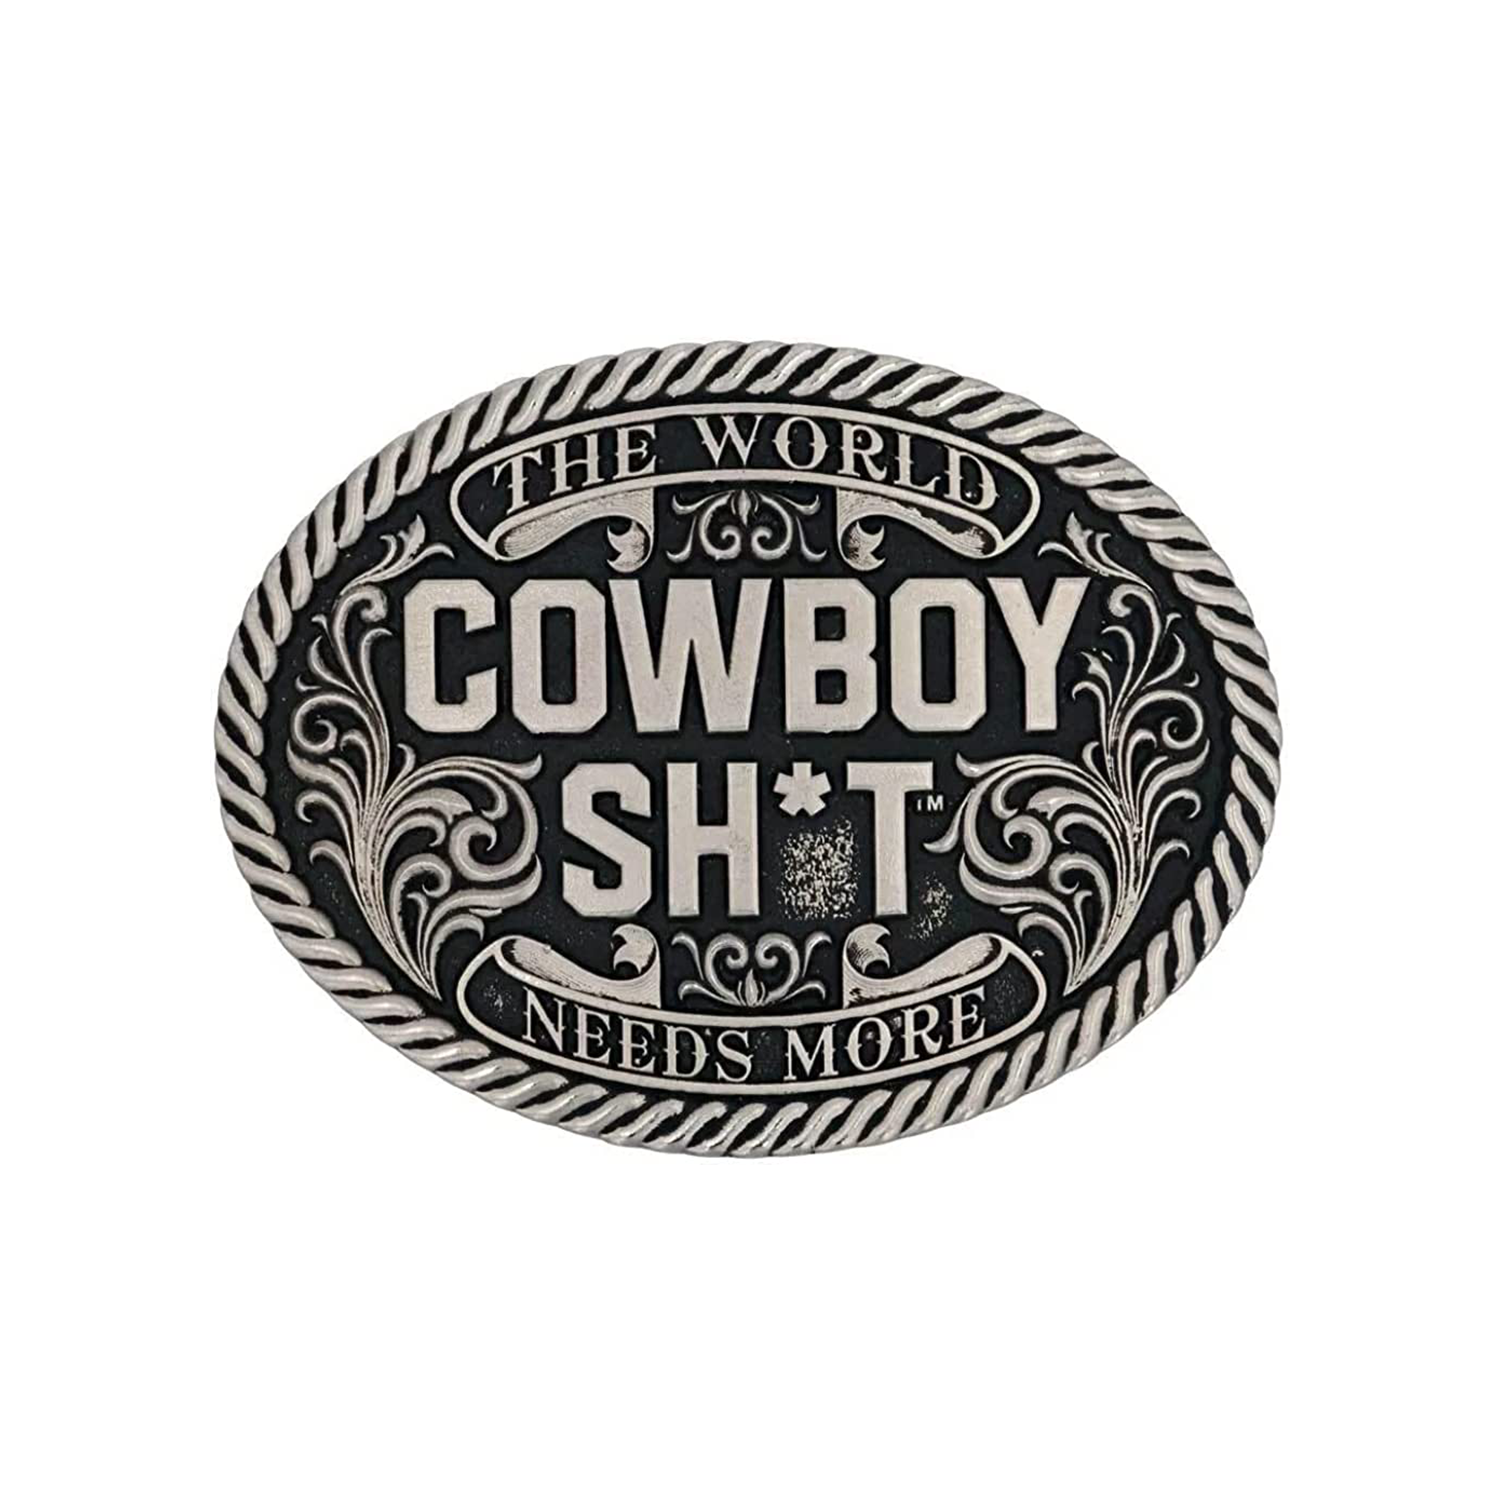 The Republic Of Texas Silver-Tone Belt Buckle, Where To Find Belt Buckles